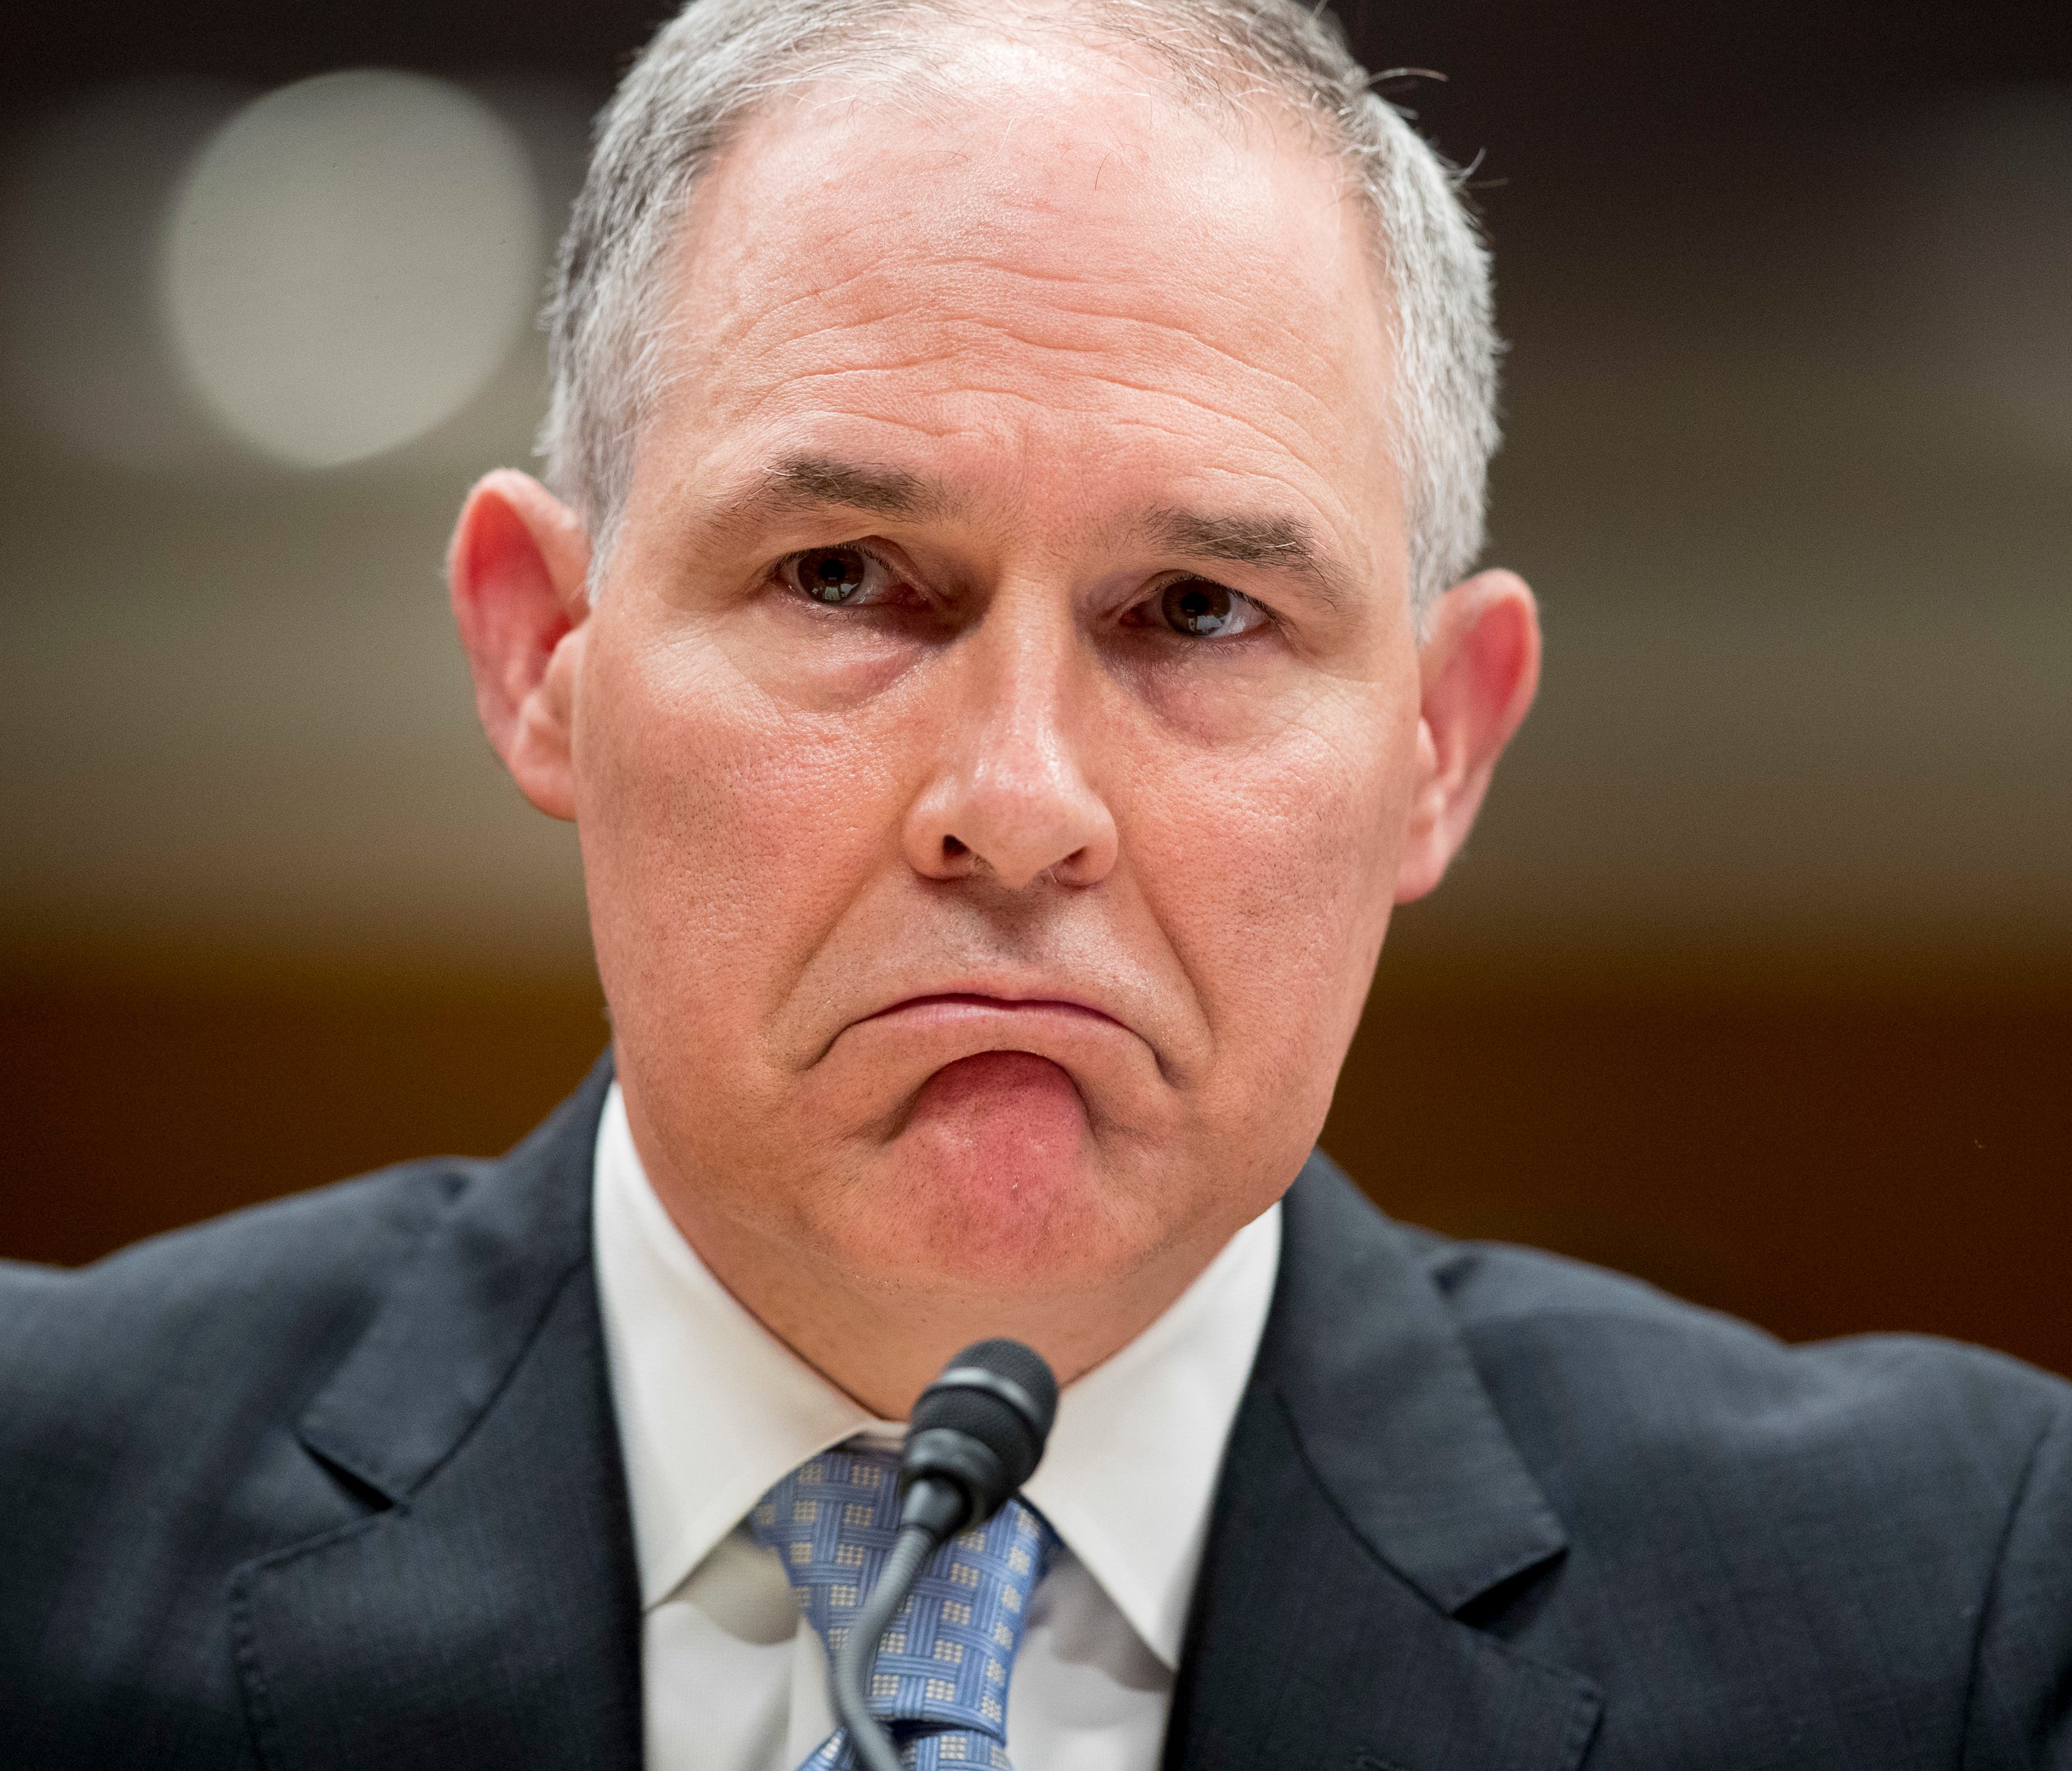 Environmental Protection Agency Administrator Scott Pruitt reacts while testifying before a Senate Appropriations subcommittee on the Interior, Environment, and Related Agencies on budget on Capitol Hill in Washington, May 16, 2018.